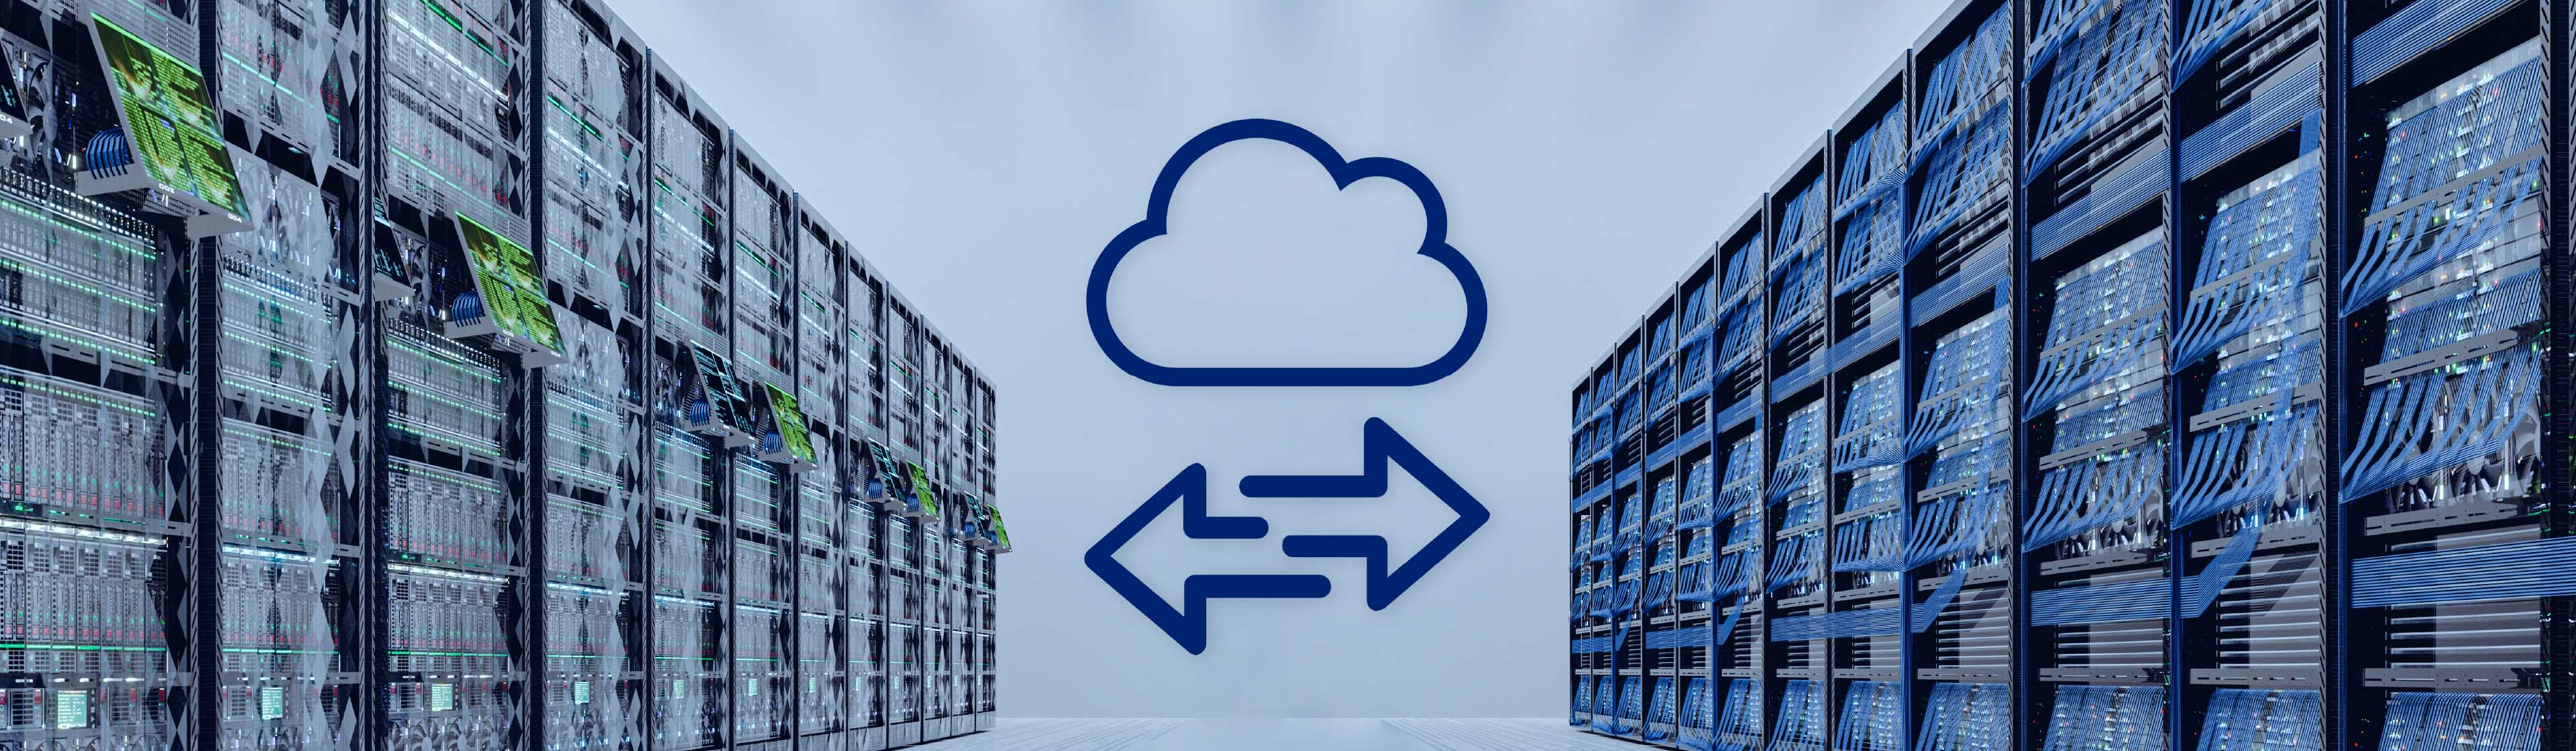 A cloud icon with arrows point left and right amongst server racks